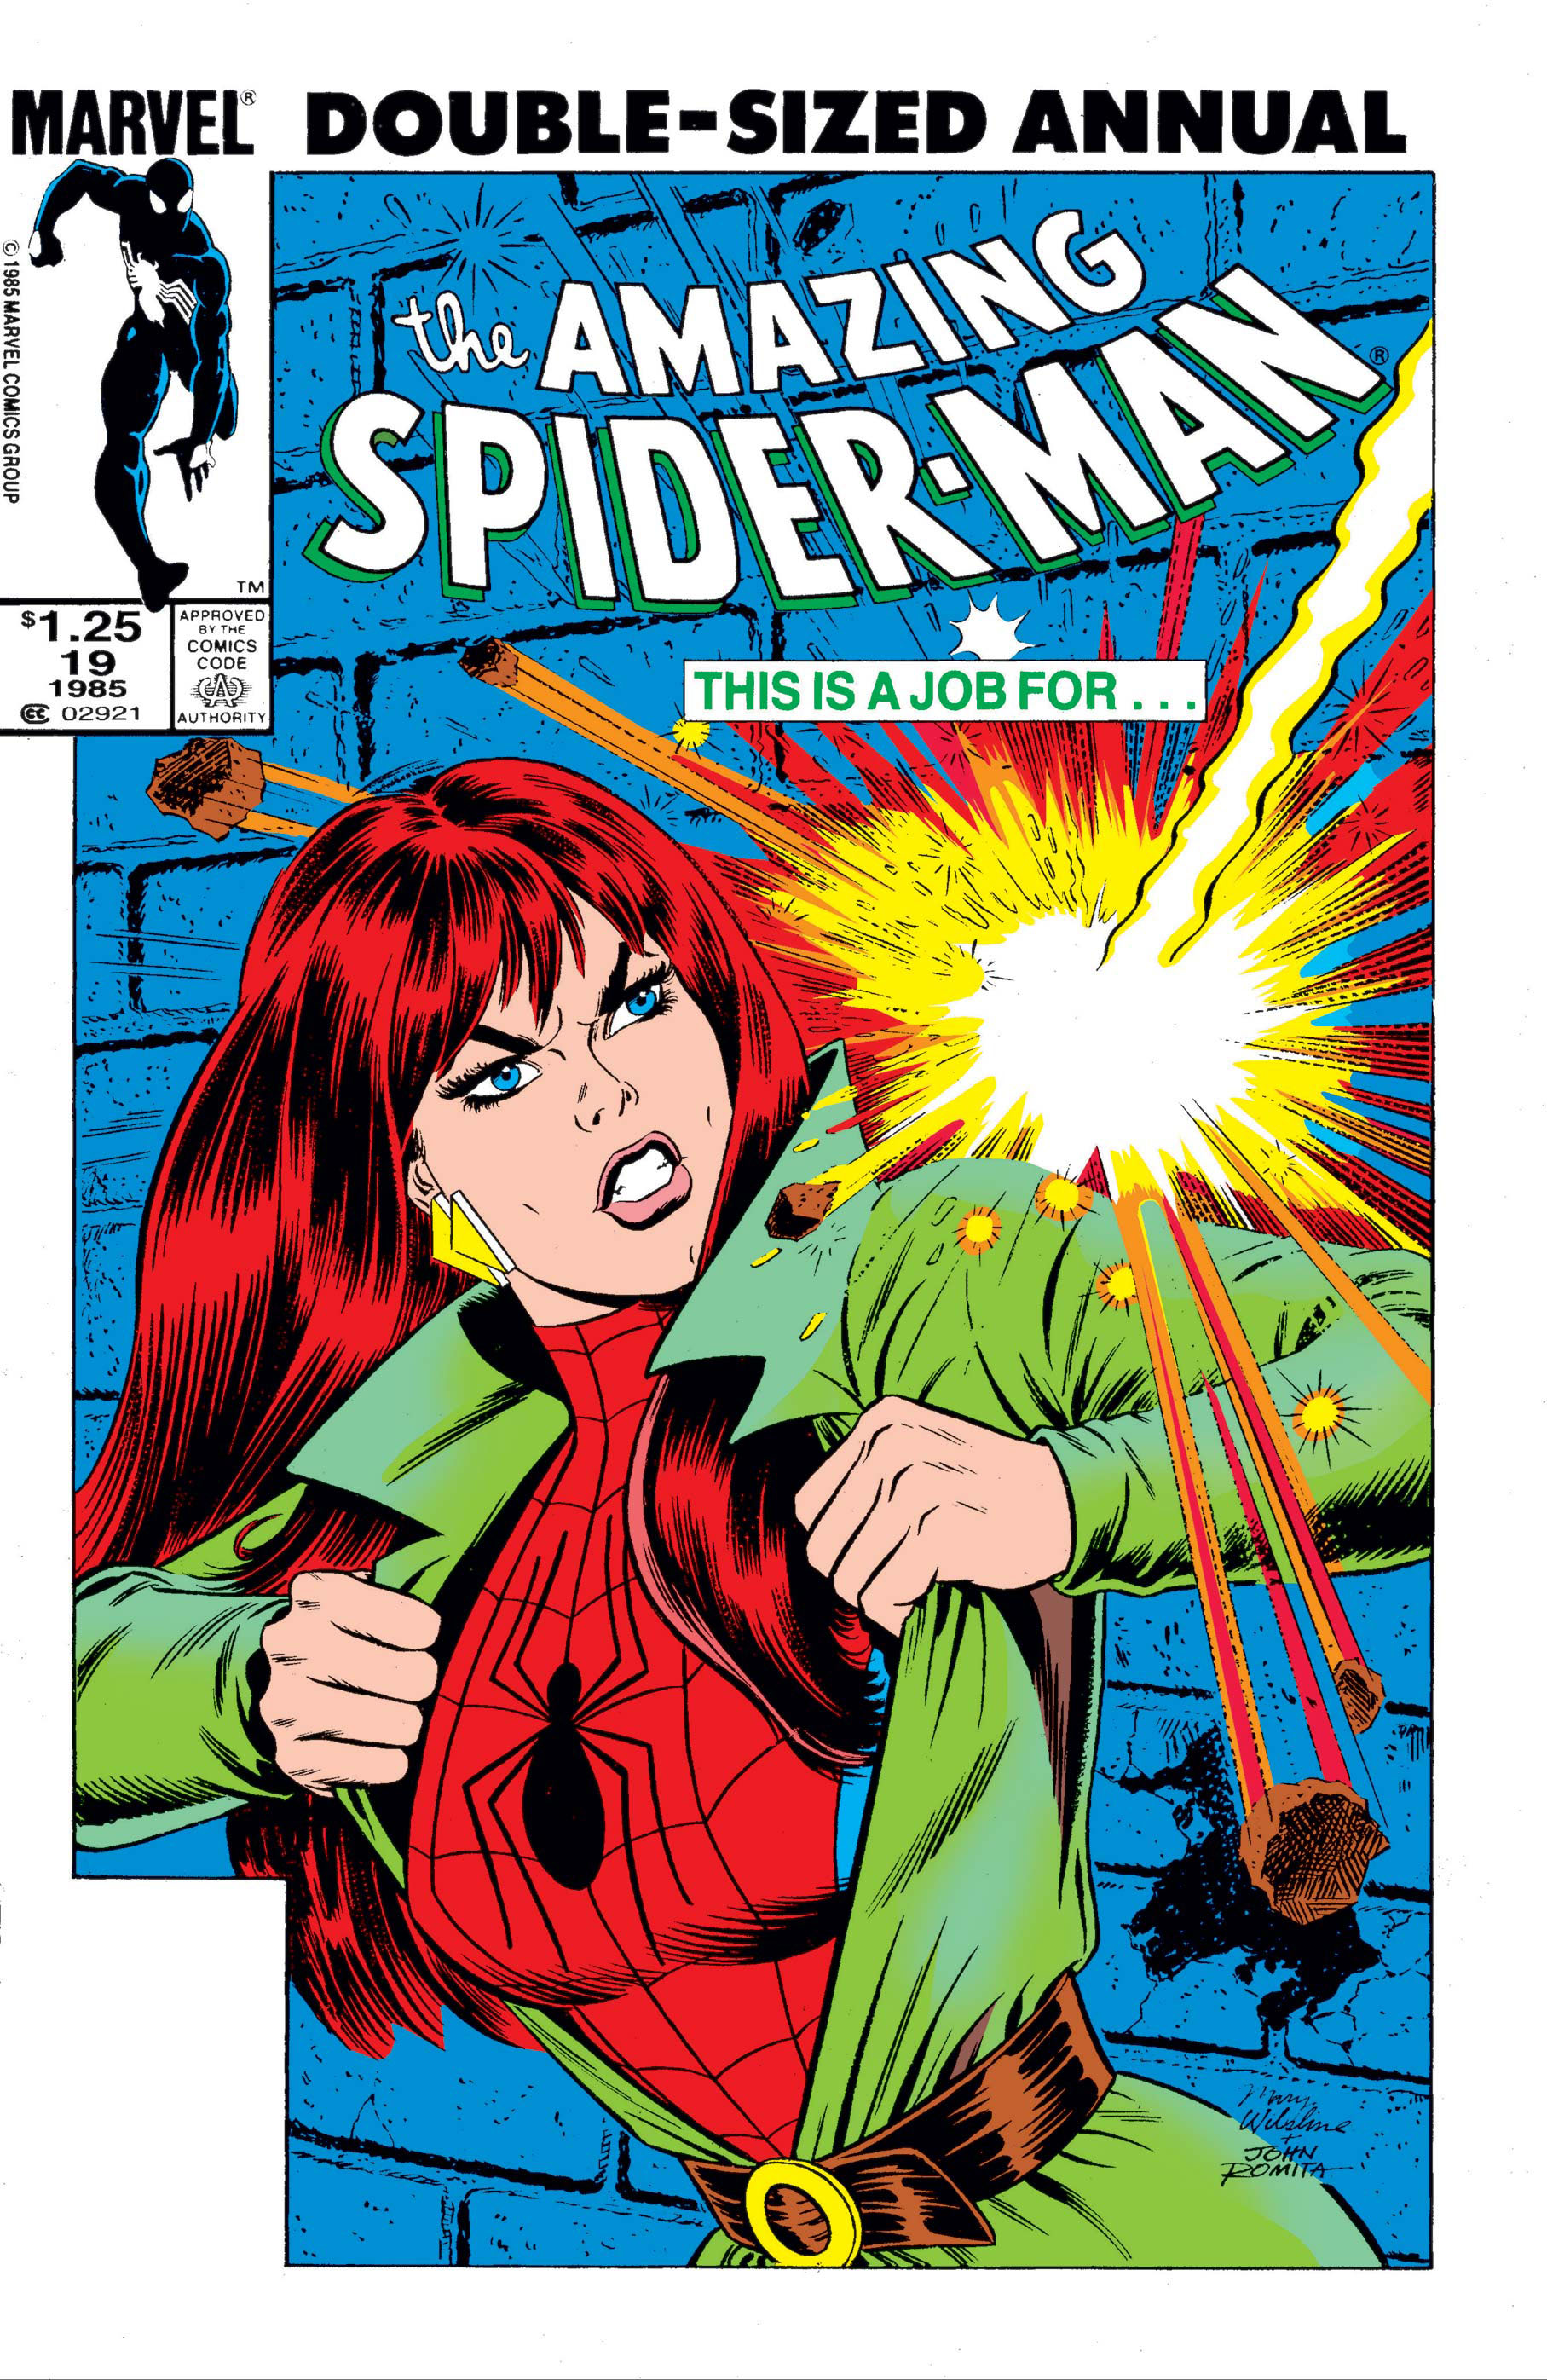 Amazing Spider-Man Annual (1964) #19 | Comic Issues | Marvel